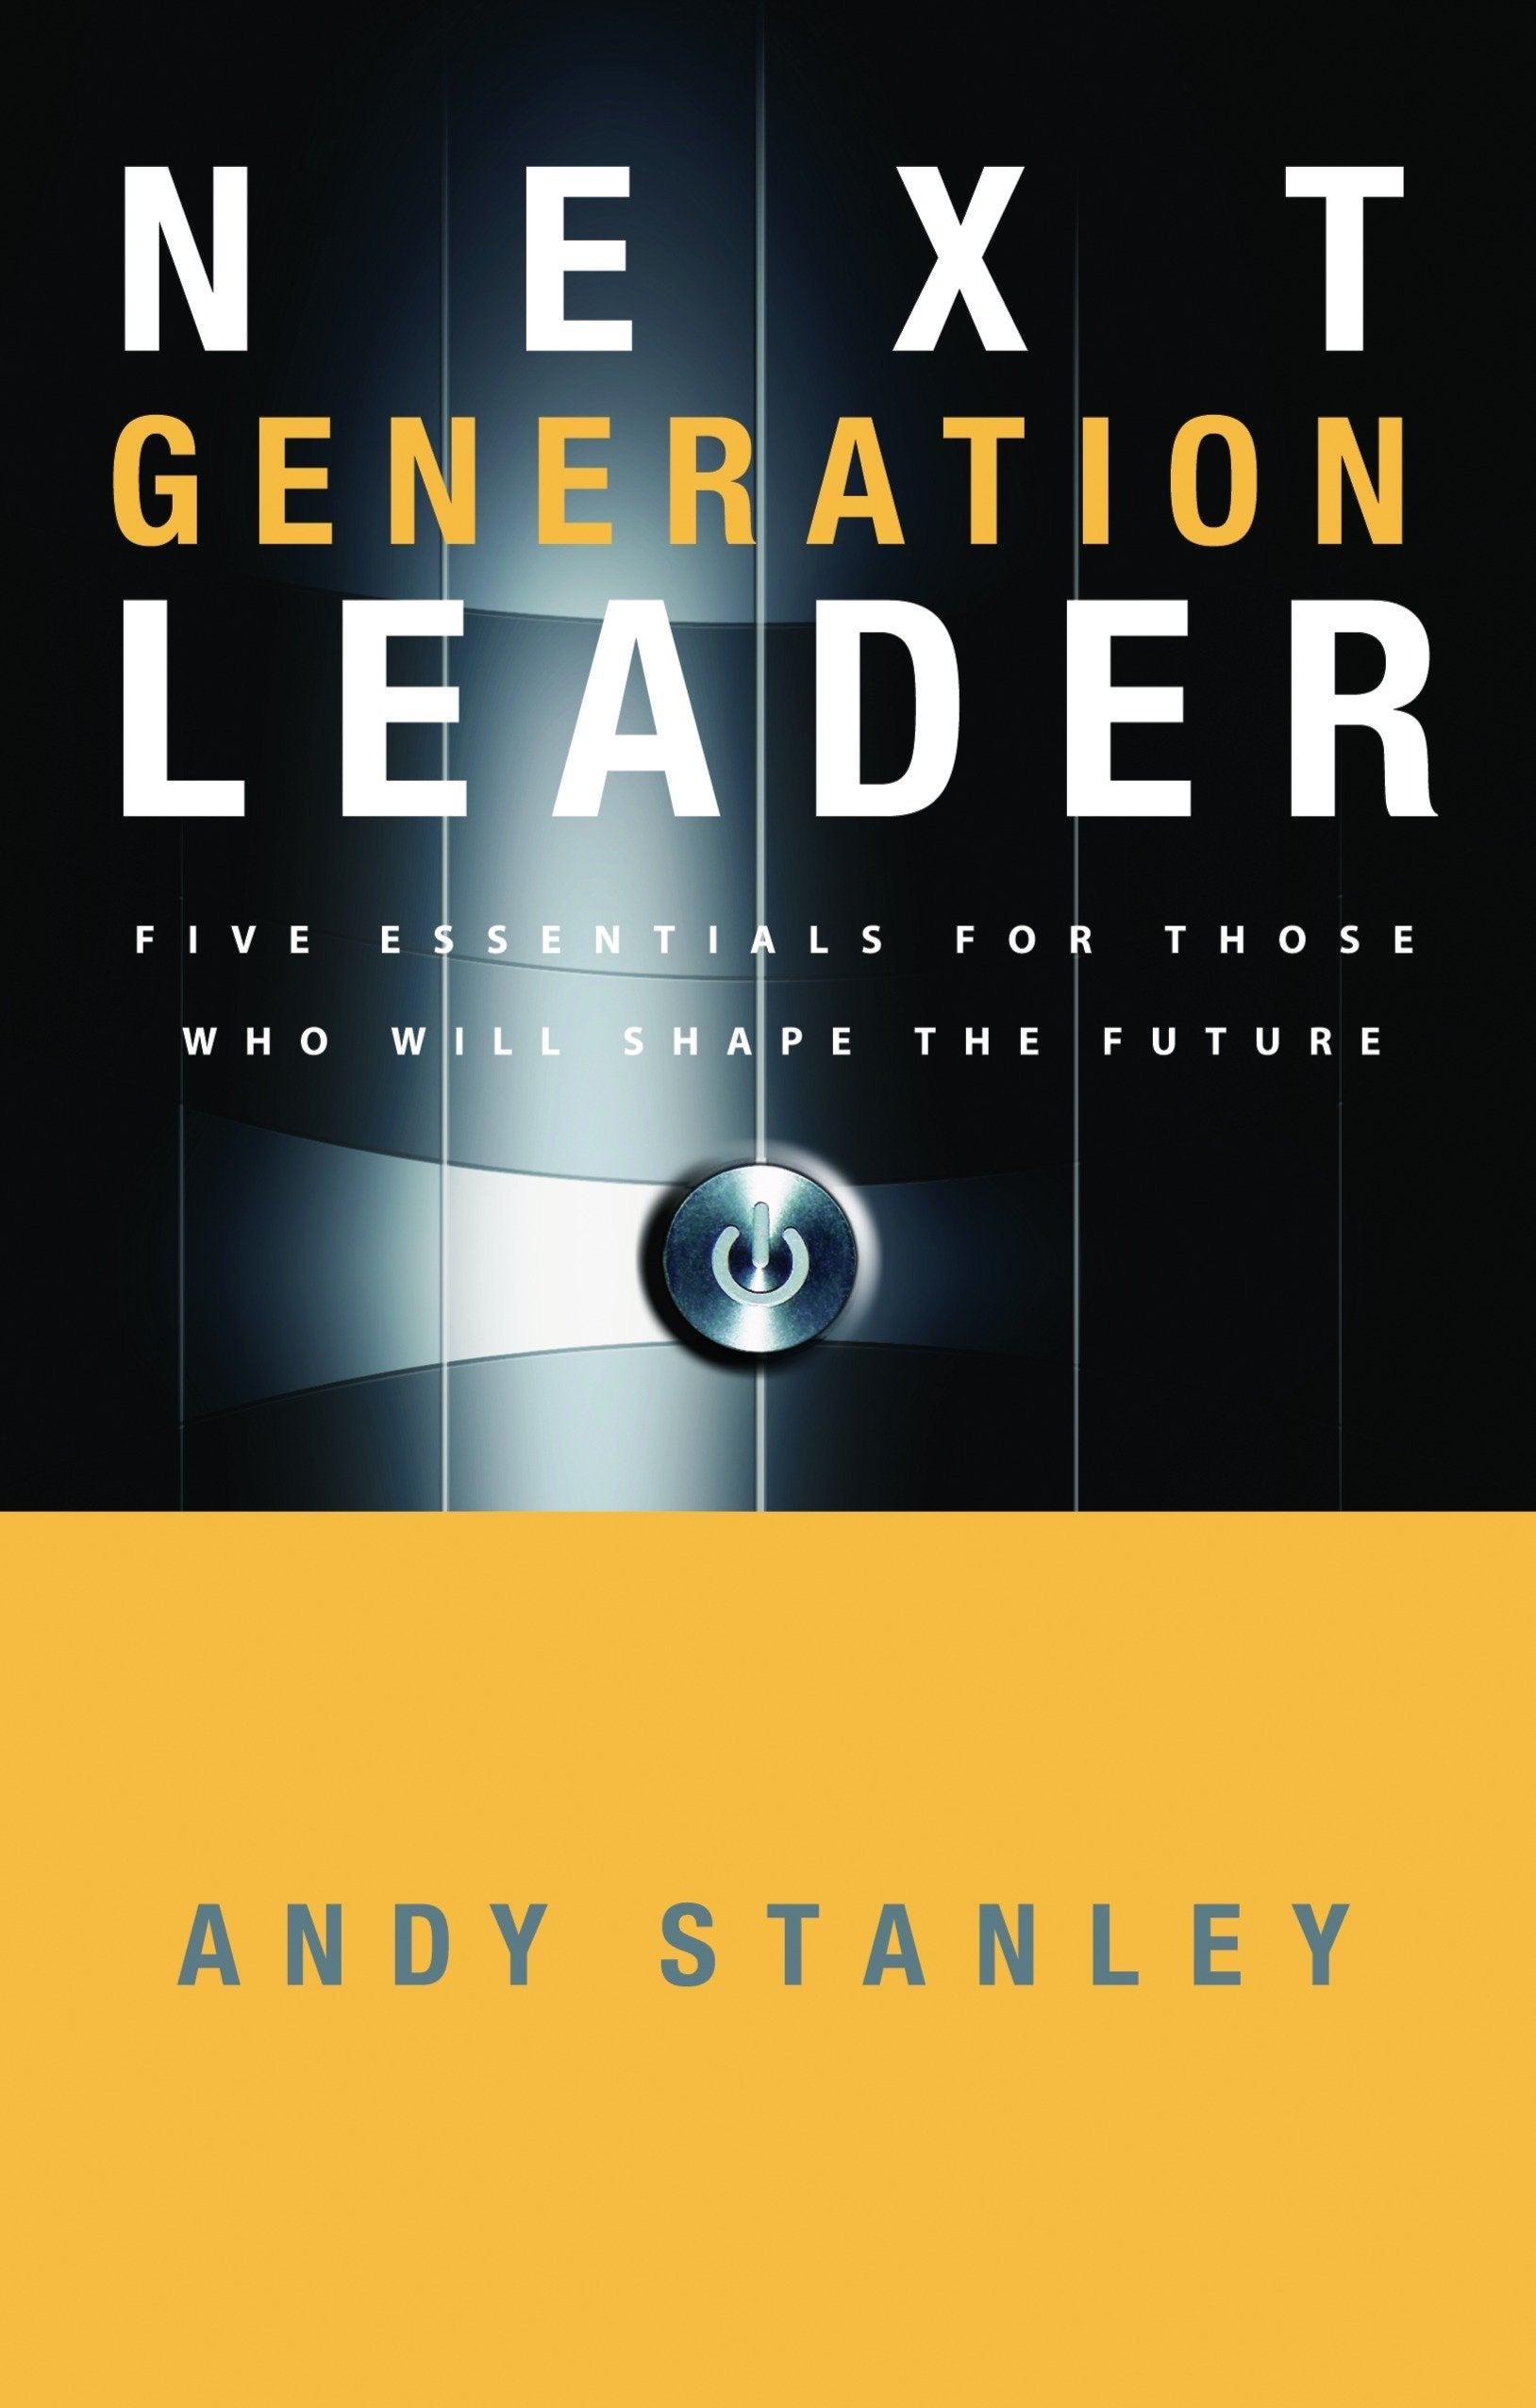 ROCKONLINE | New Creation Church | NCC | Joseph Prince | ROCK Bookshop | ROCK Bookstore | Star Vista | The Next Generation Leader: Five Essentials for Those Who Will Shape the Future | Andy Stanley | Work & Business | Leadership | Christian Living | Free delivery for Singapore Orders above $50.